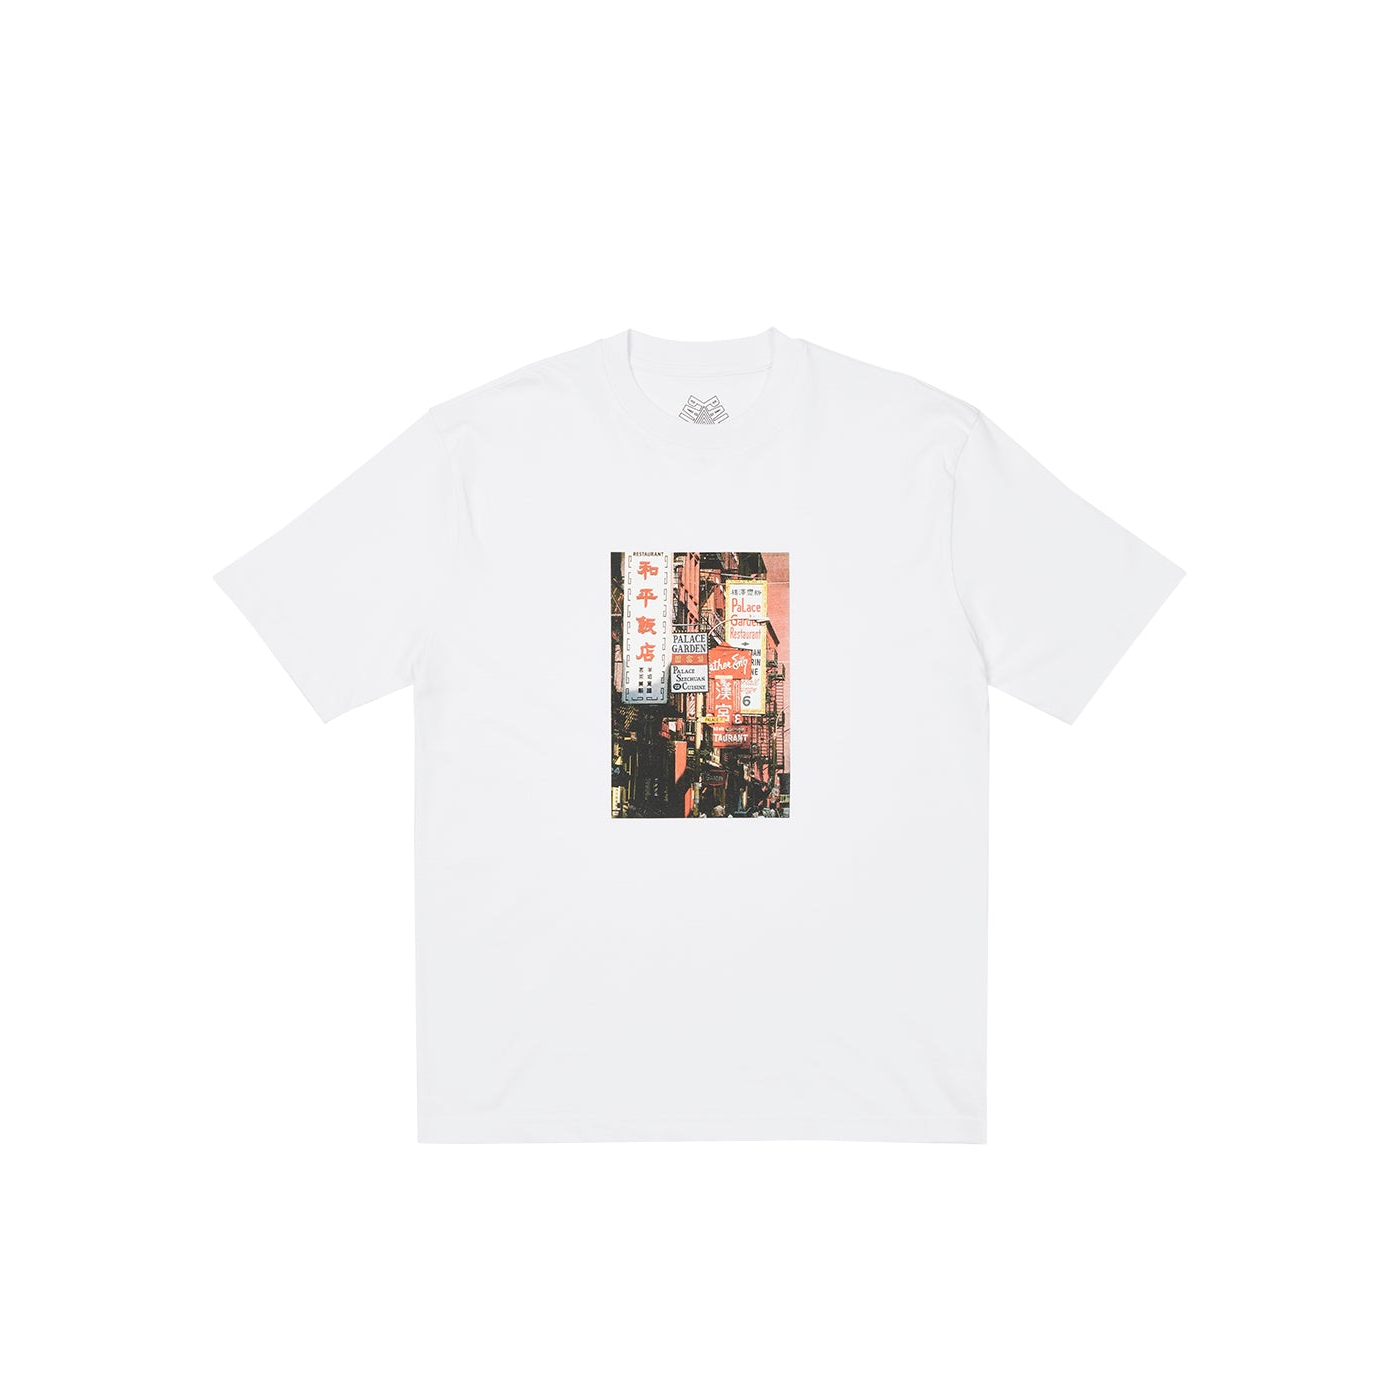 Thumbnail DOWNTOWN T-SHIRT WHITE one color